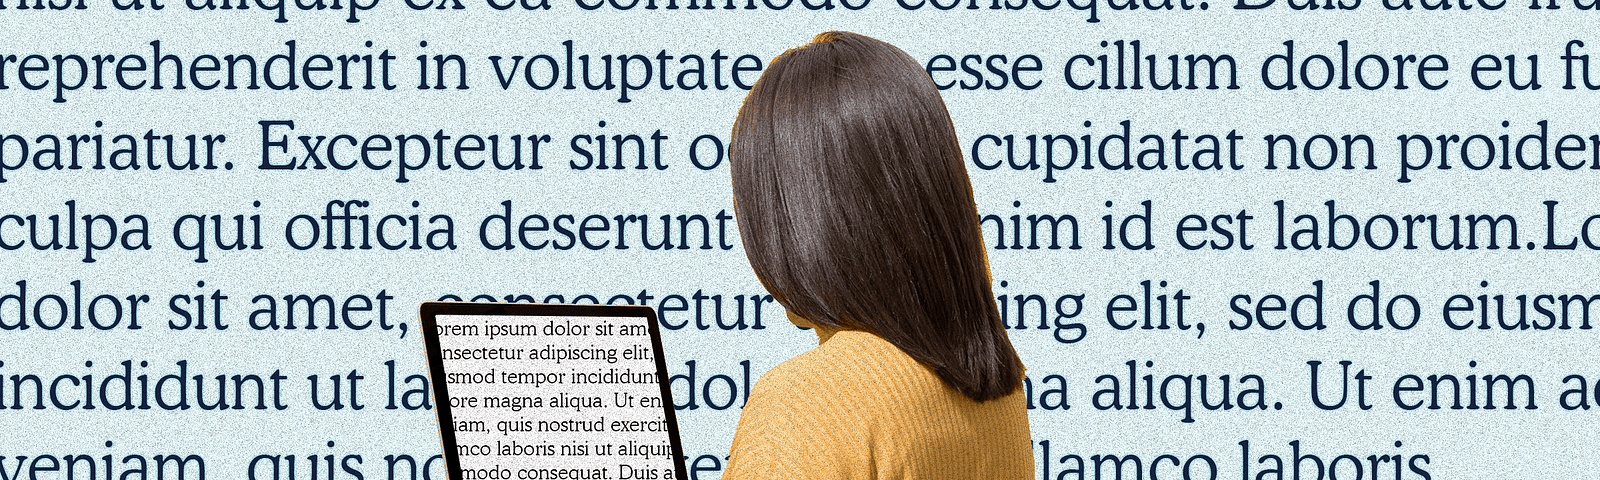 A collage image of a woman on her laptop, with lorem ipsum text as the background.